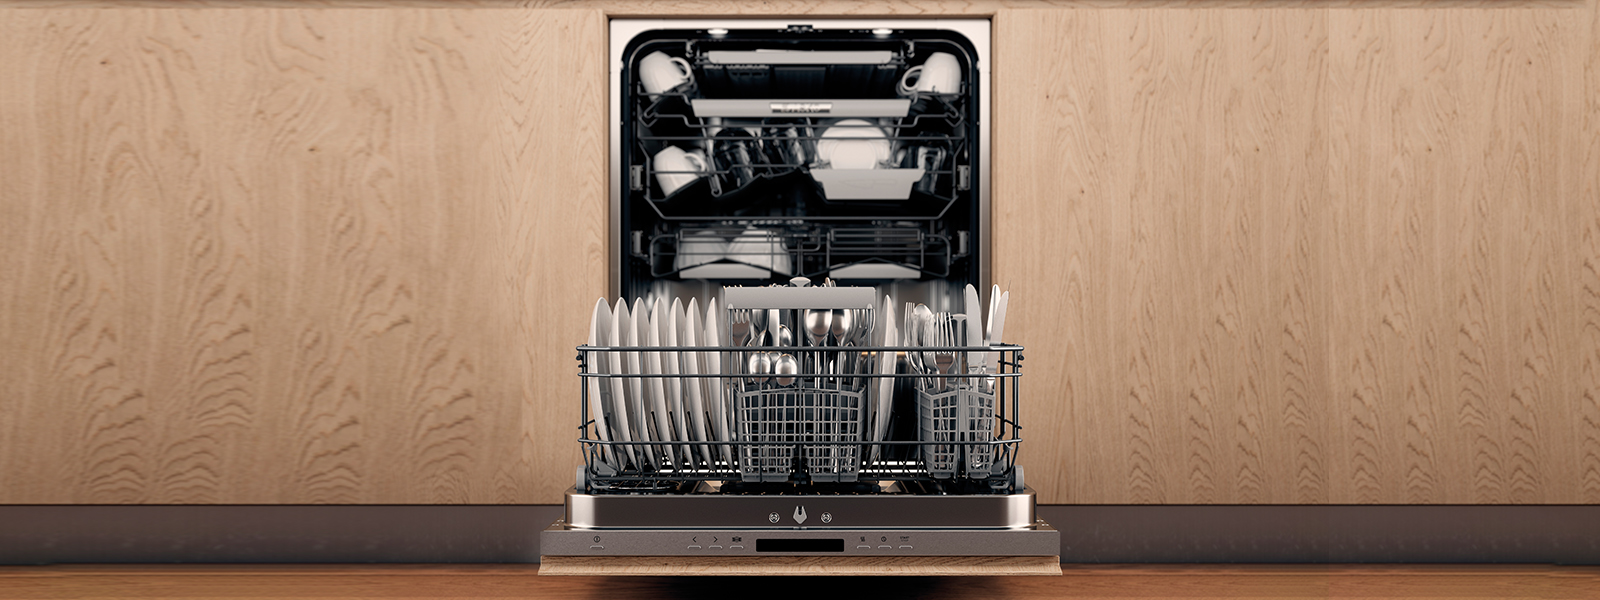 Save up to $400 on selected Asko Dishwashers at Hart & Co